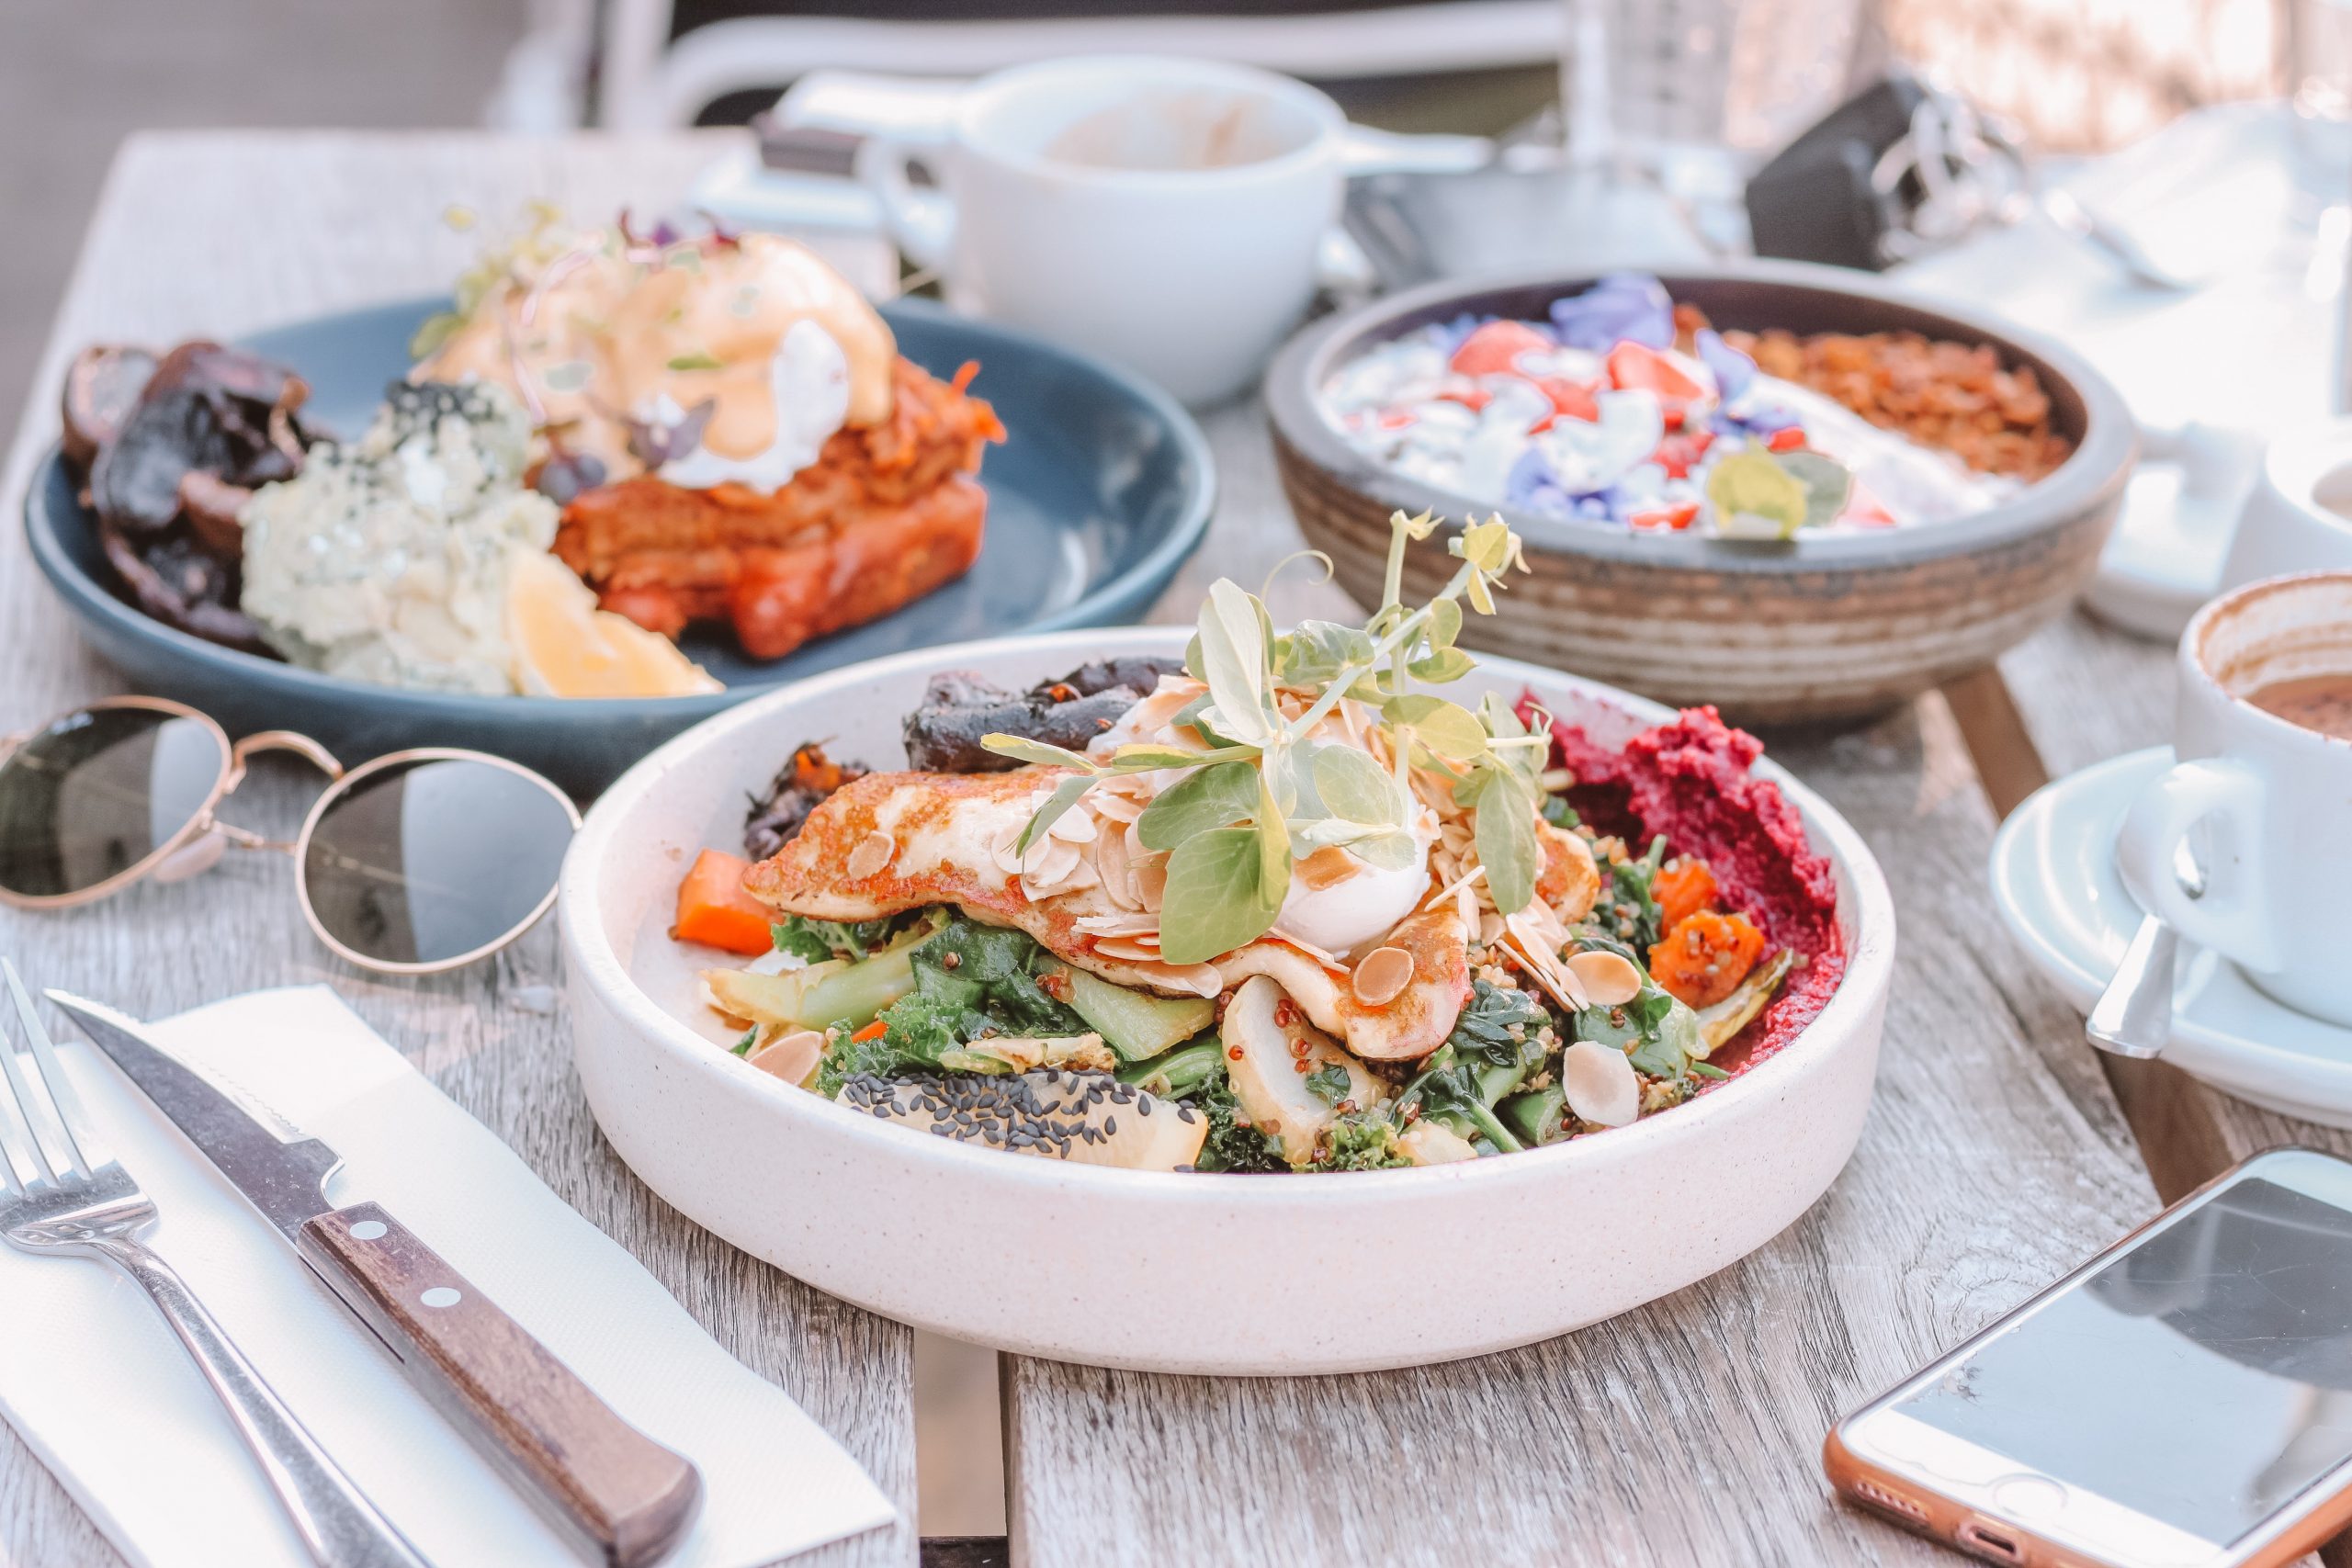 2022 Dining Out Trends: Where Healthy Meals Are Still King